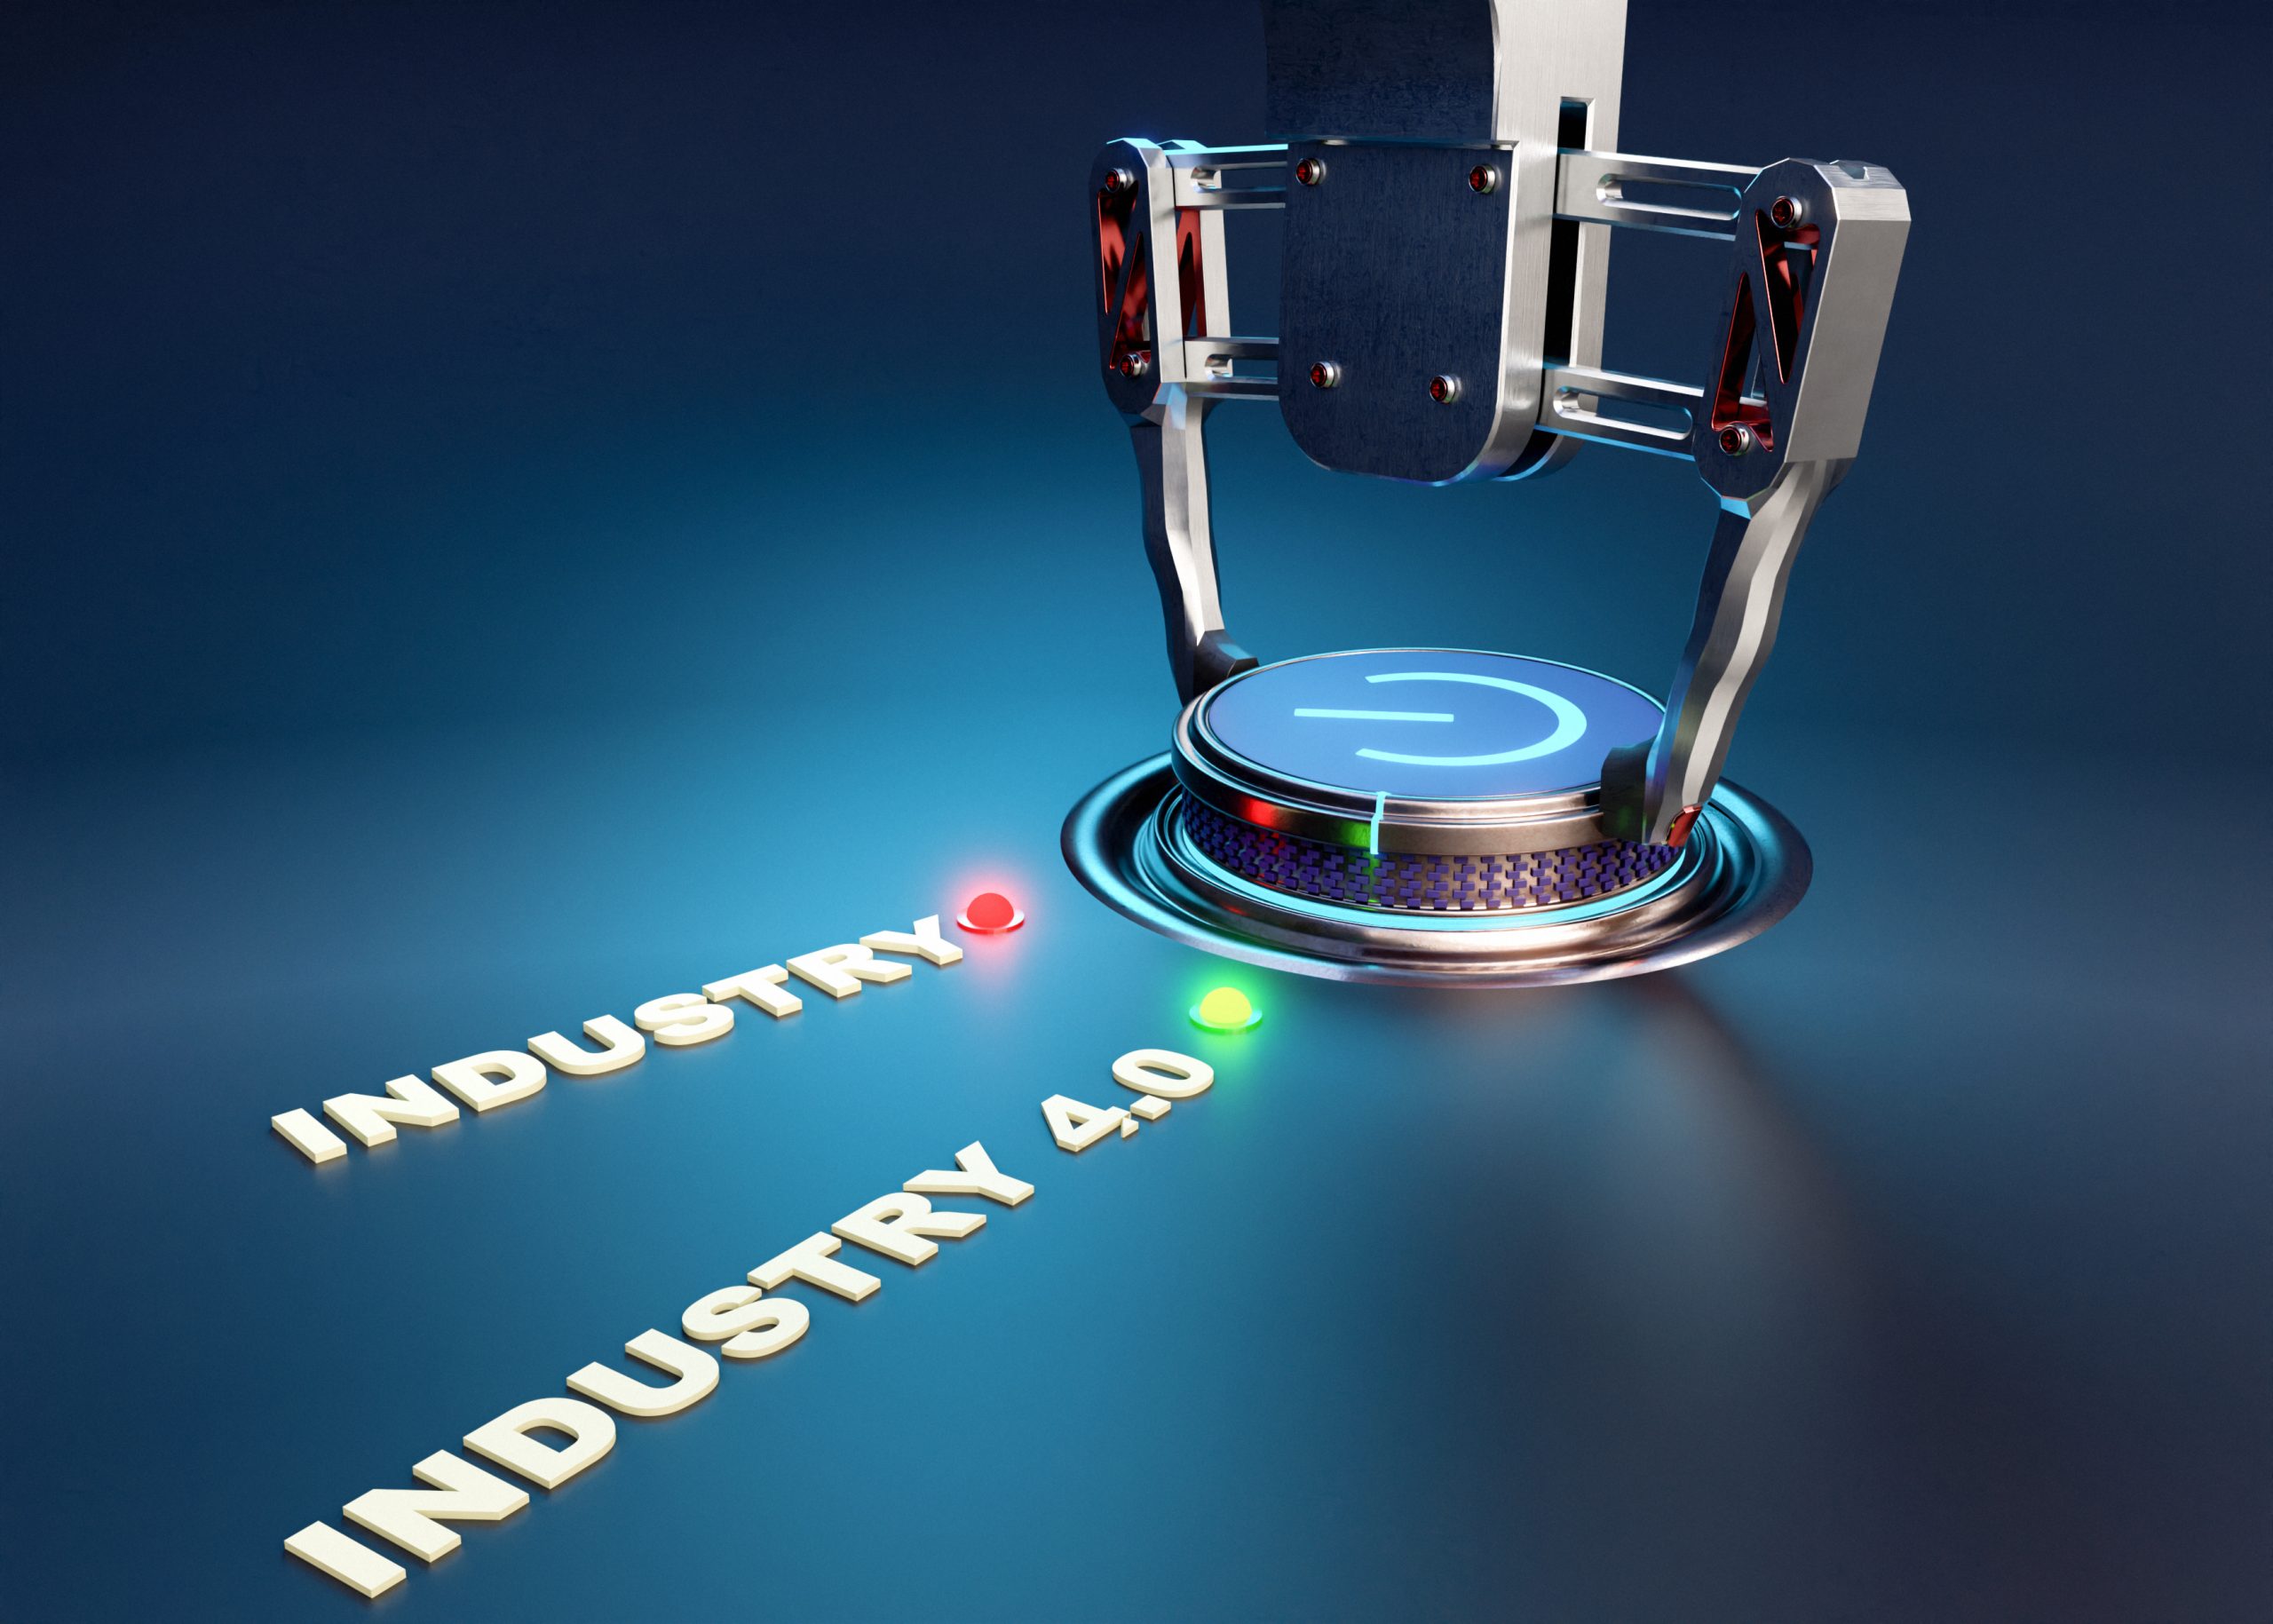 6 PAIN POINTS IN DIGITAL TRANSFORMATION FOR MANUFACTURING